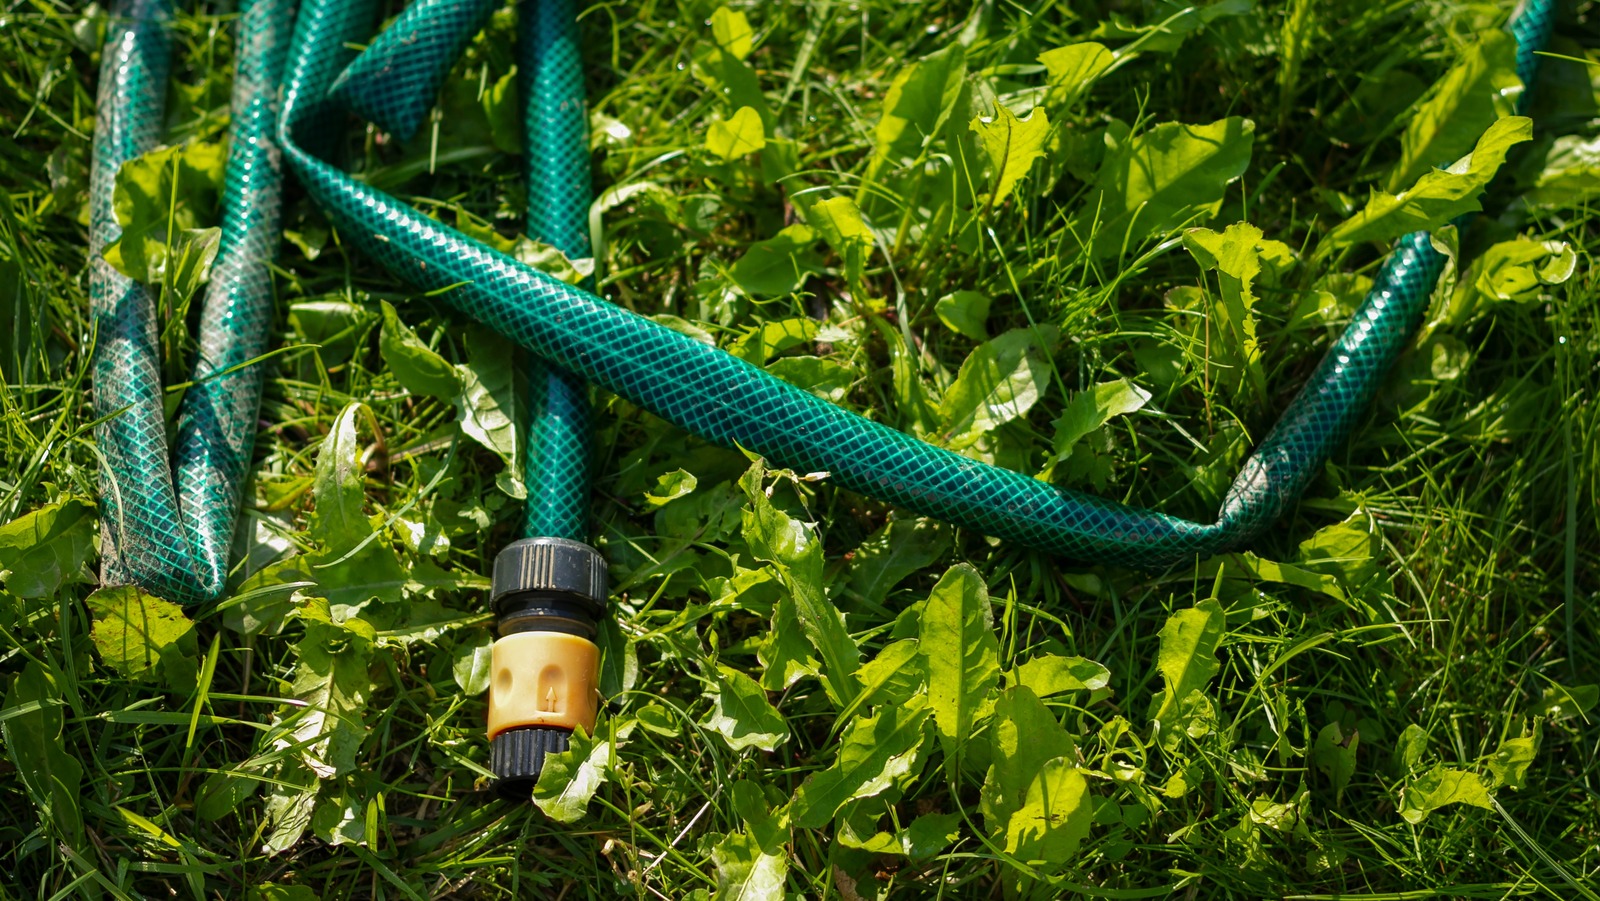 Use This Clever Pool Noodle Hack To Prevent Kinks In Your Garden Hose